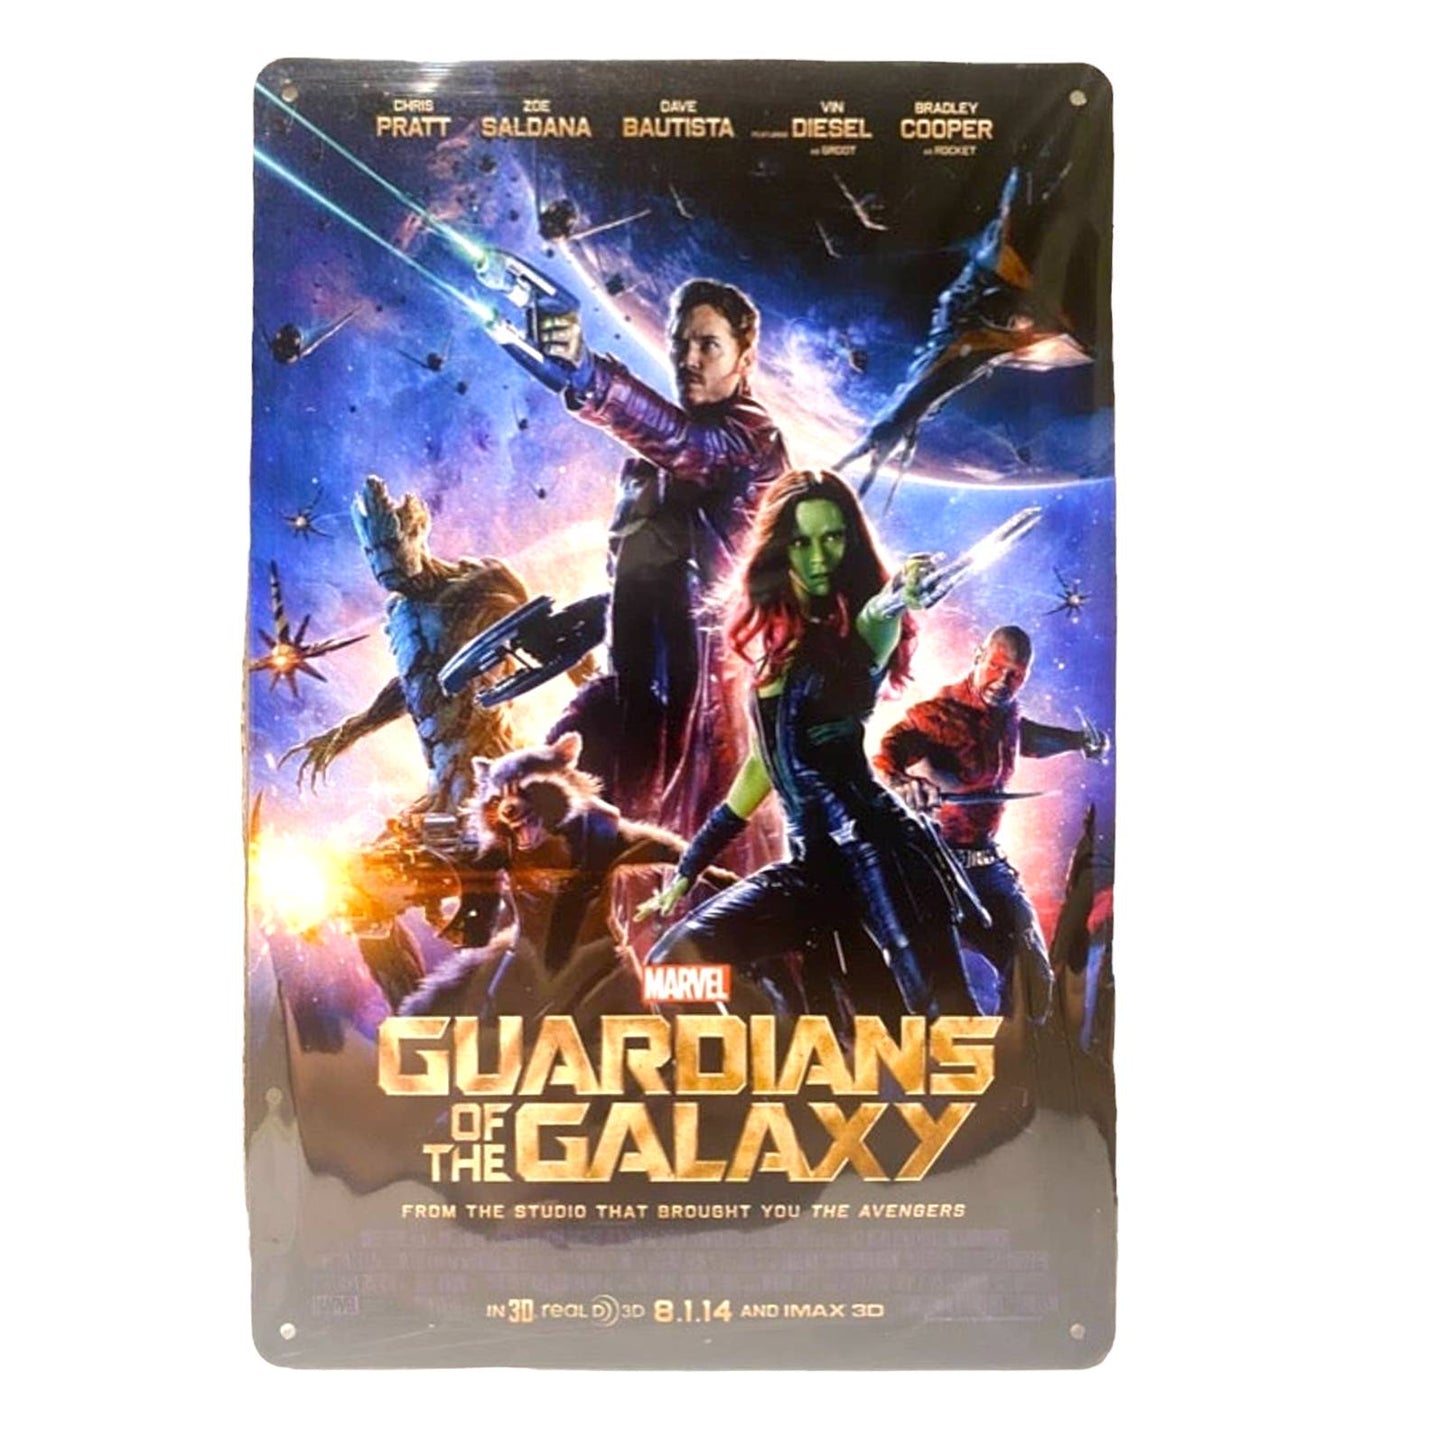 Guardians of the Galaxy Movie Poster Metal Tin Sign 8"x12"